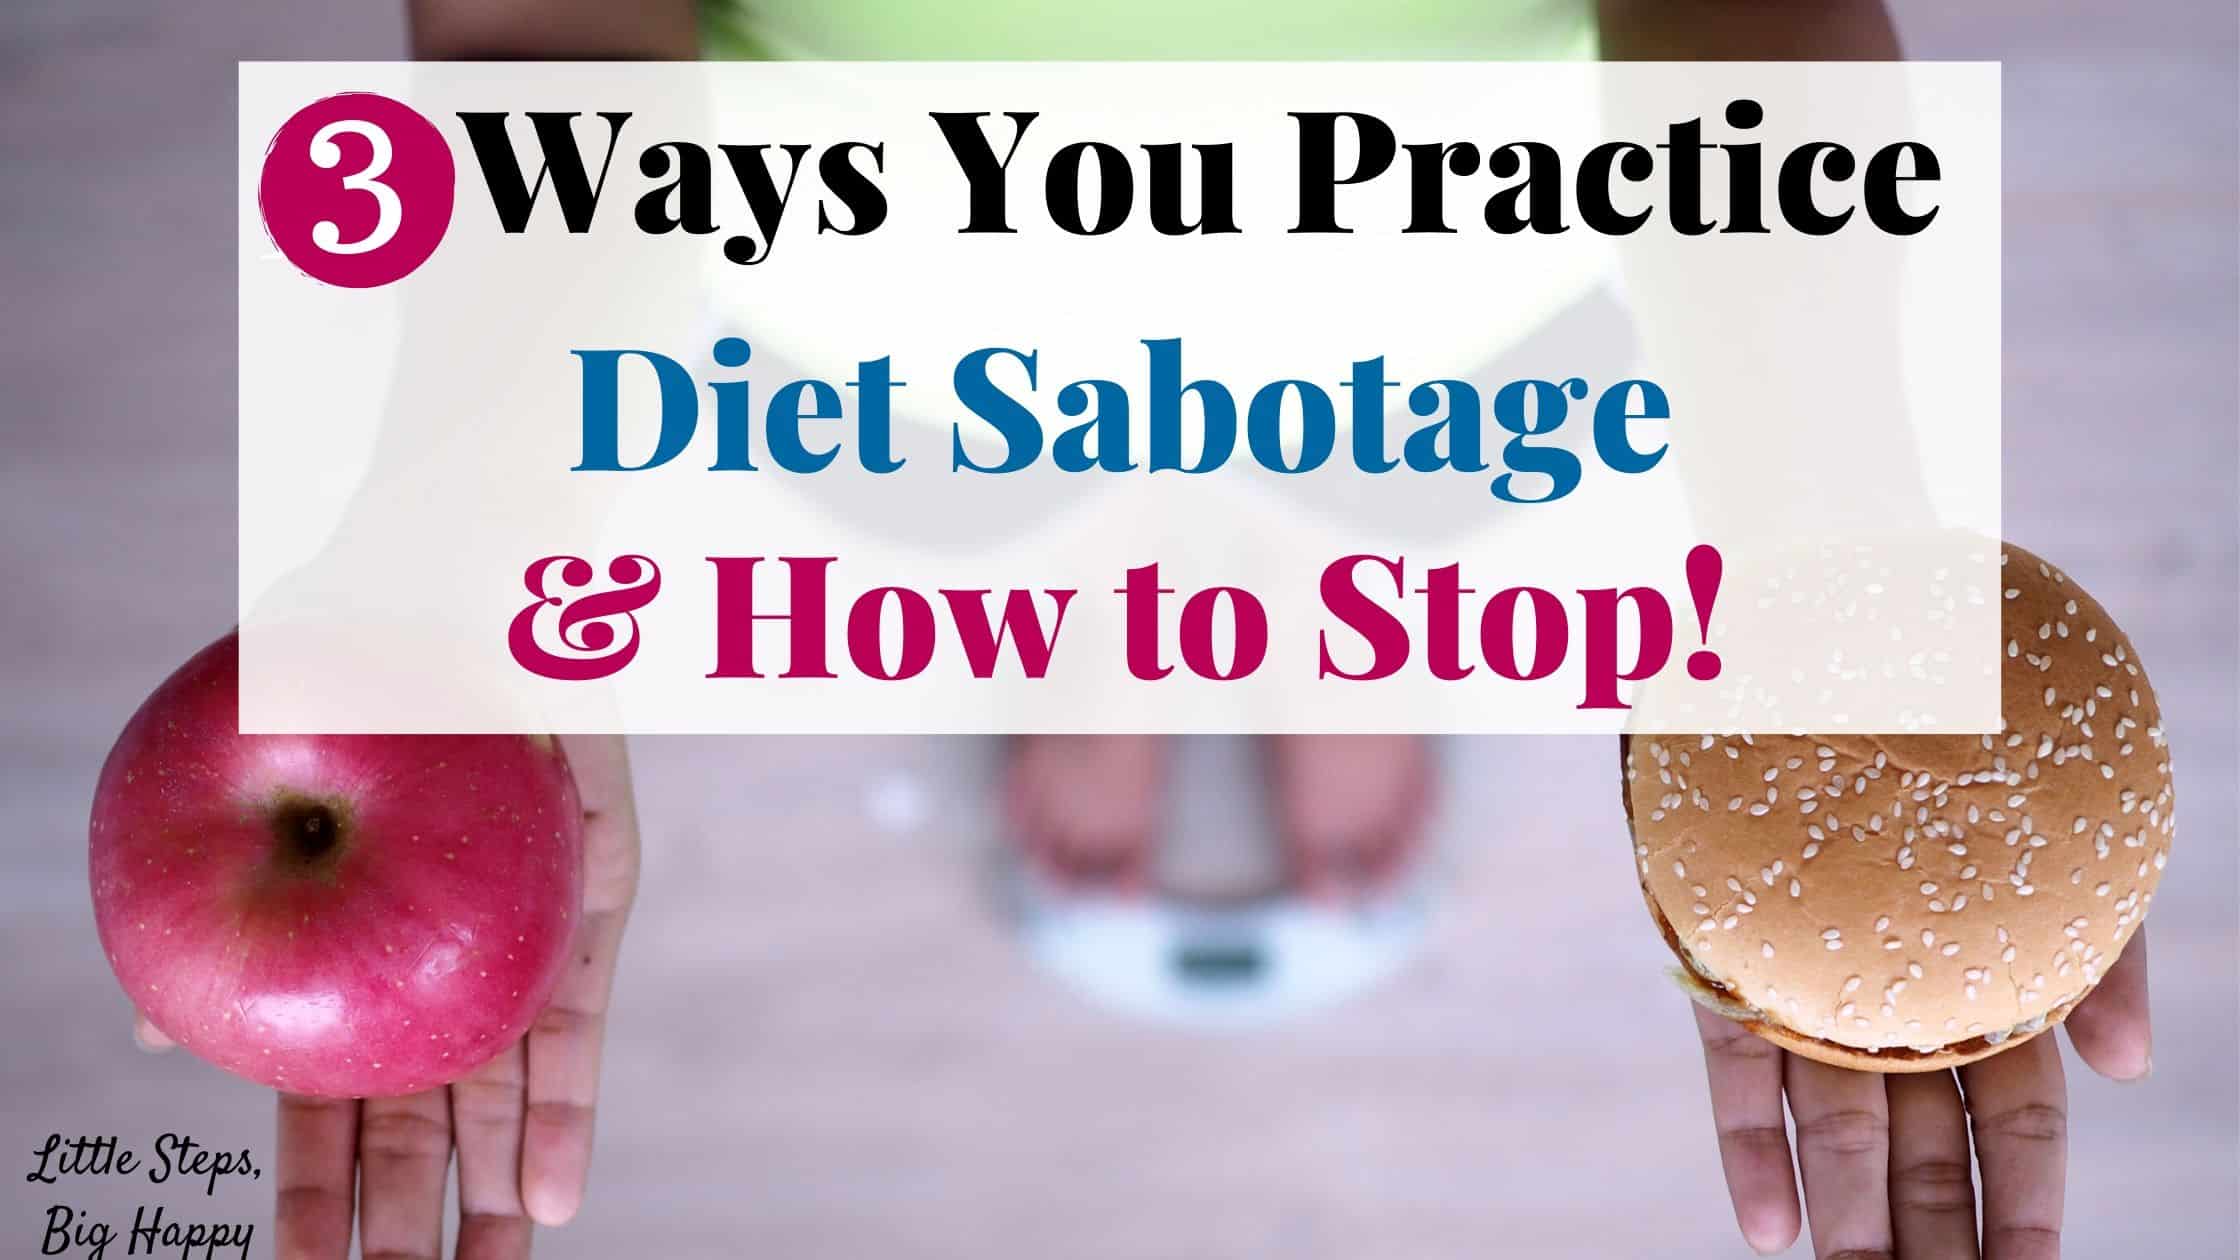 Person holding an apple and a burger. Text: 3 Ways You Practice Diet Sabotage and How to Stop